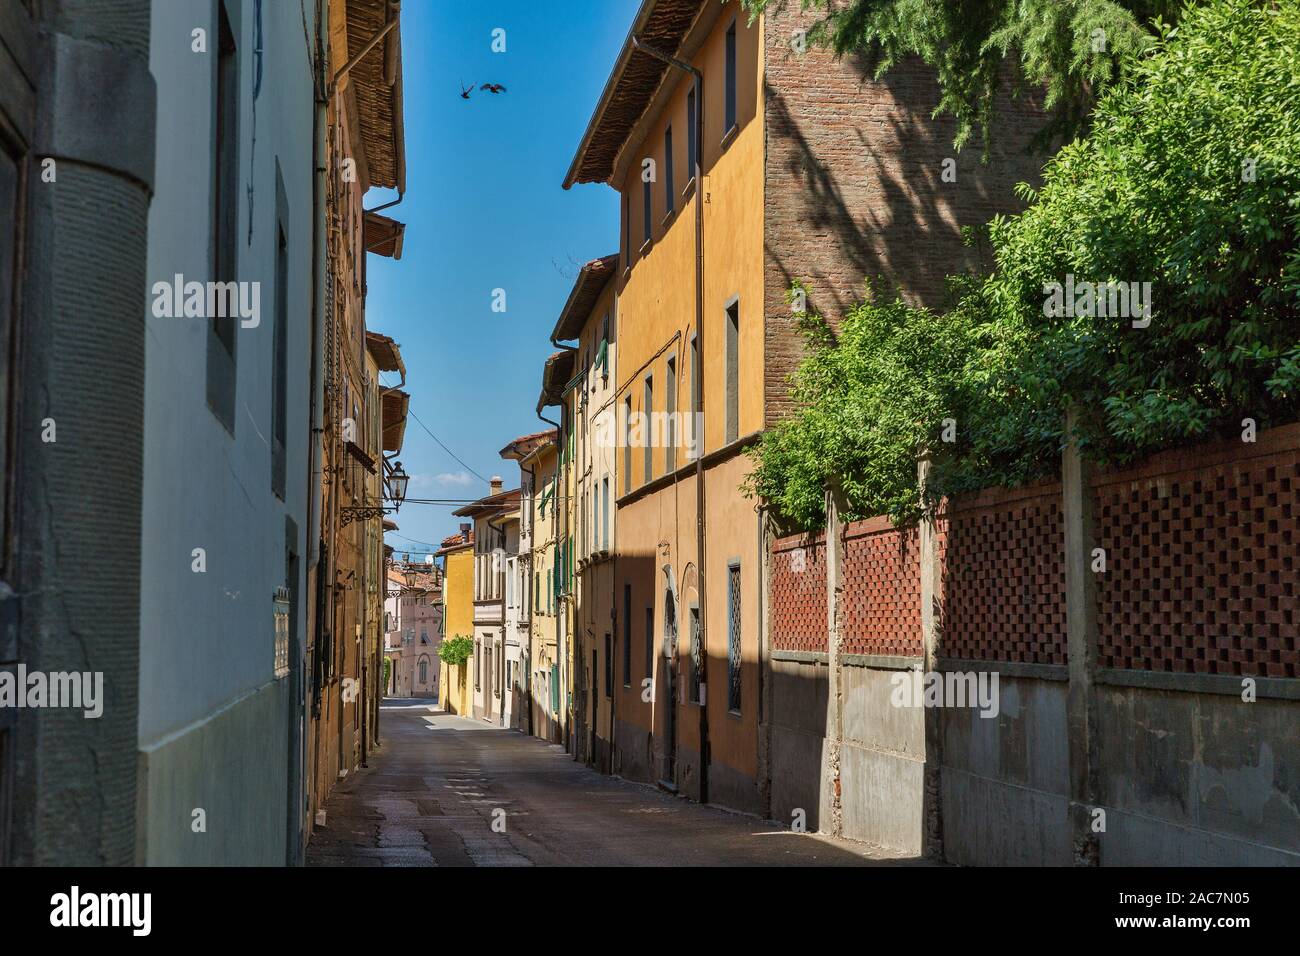 Montopoli in Val d'Arno narrow street architecture. It is a municipality in the Province of Pisa in the Italian region Tuscany. Stock Photo